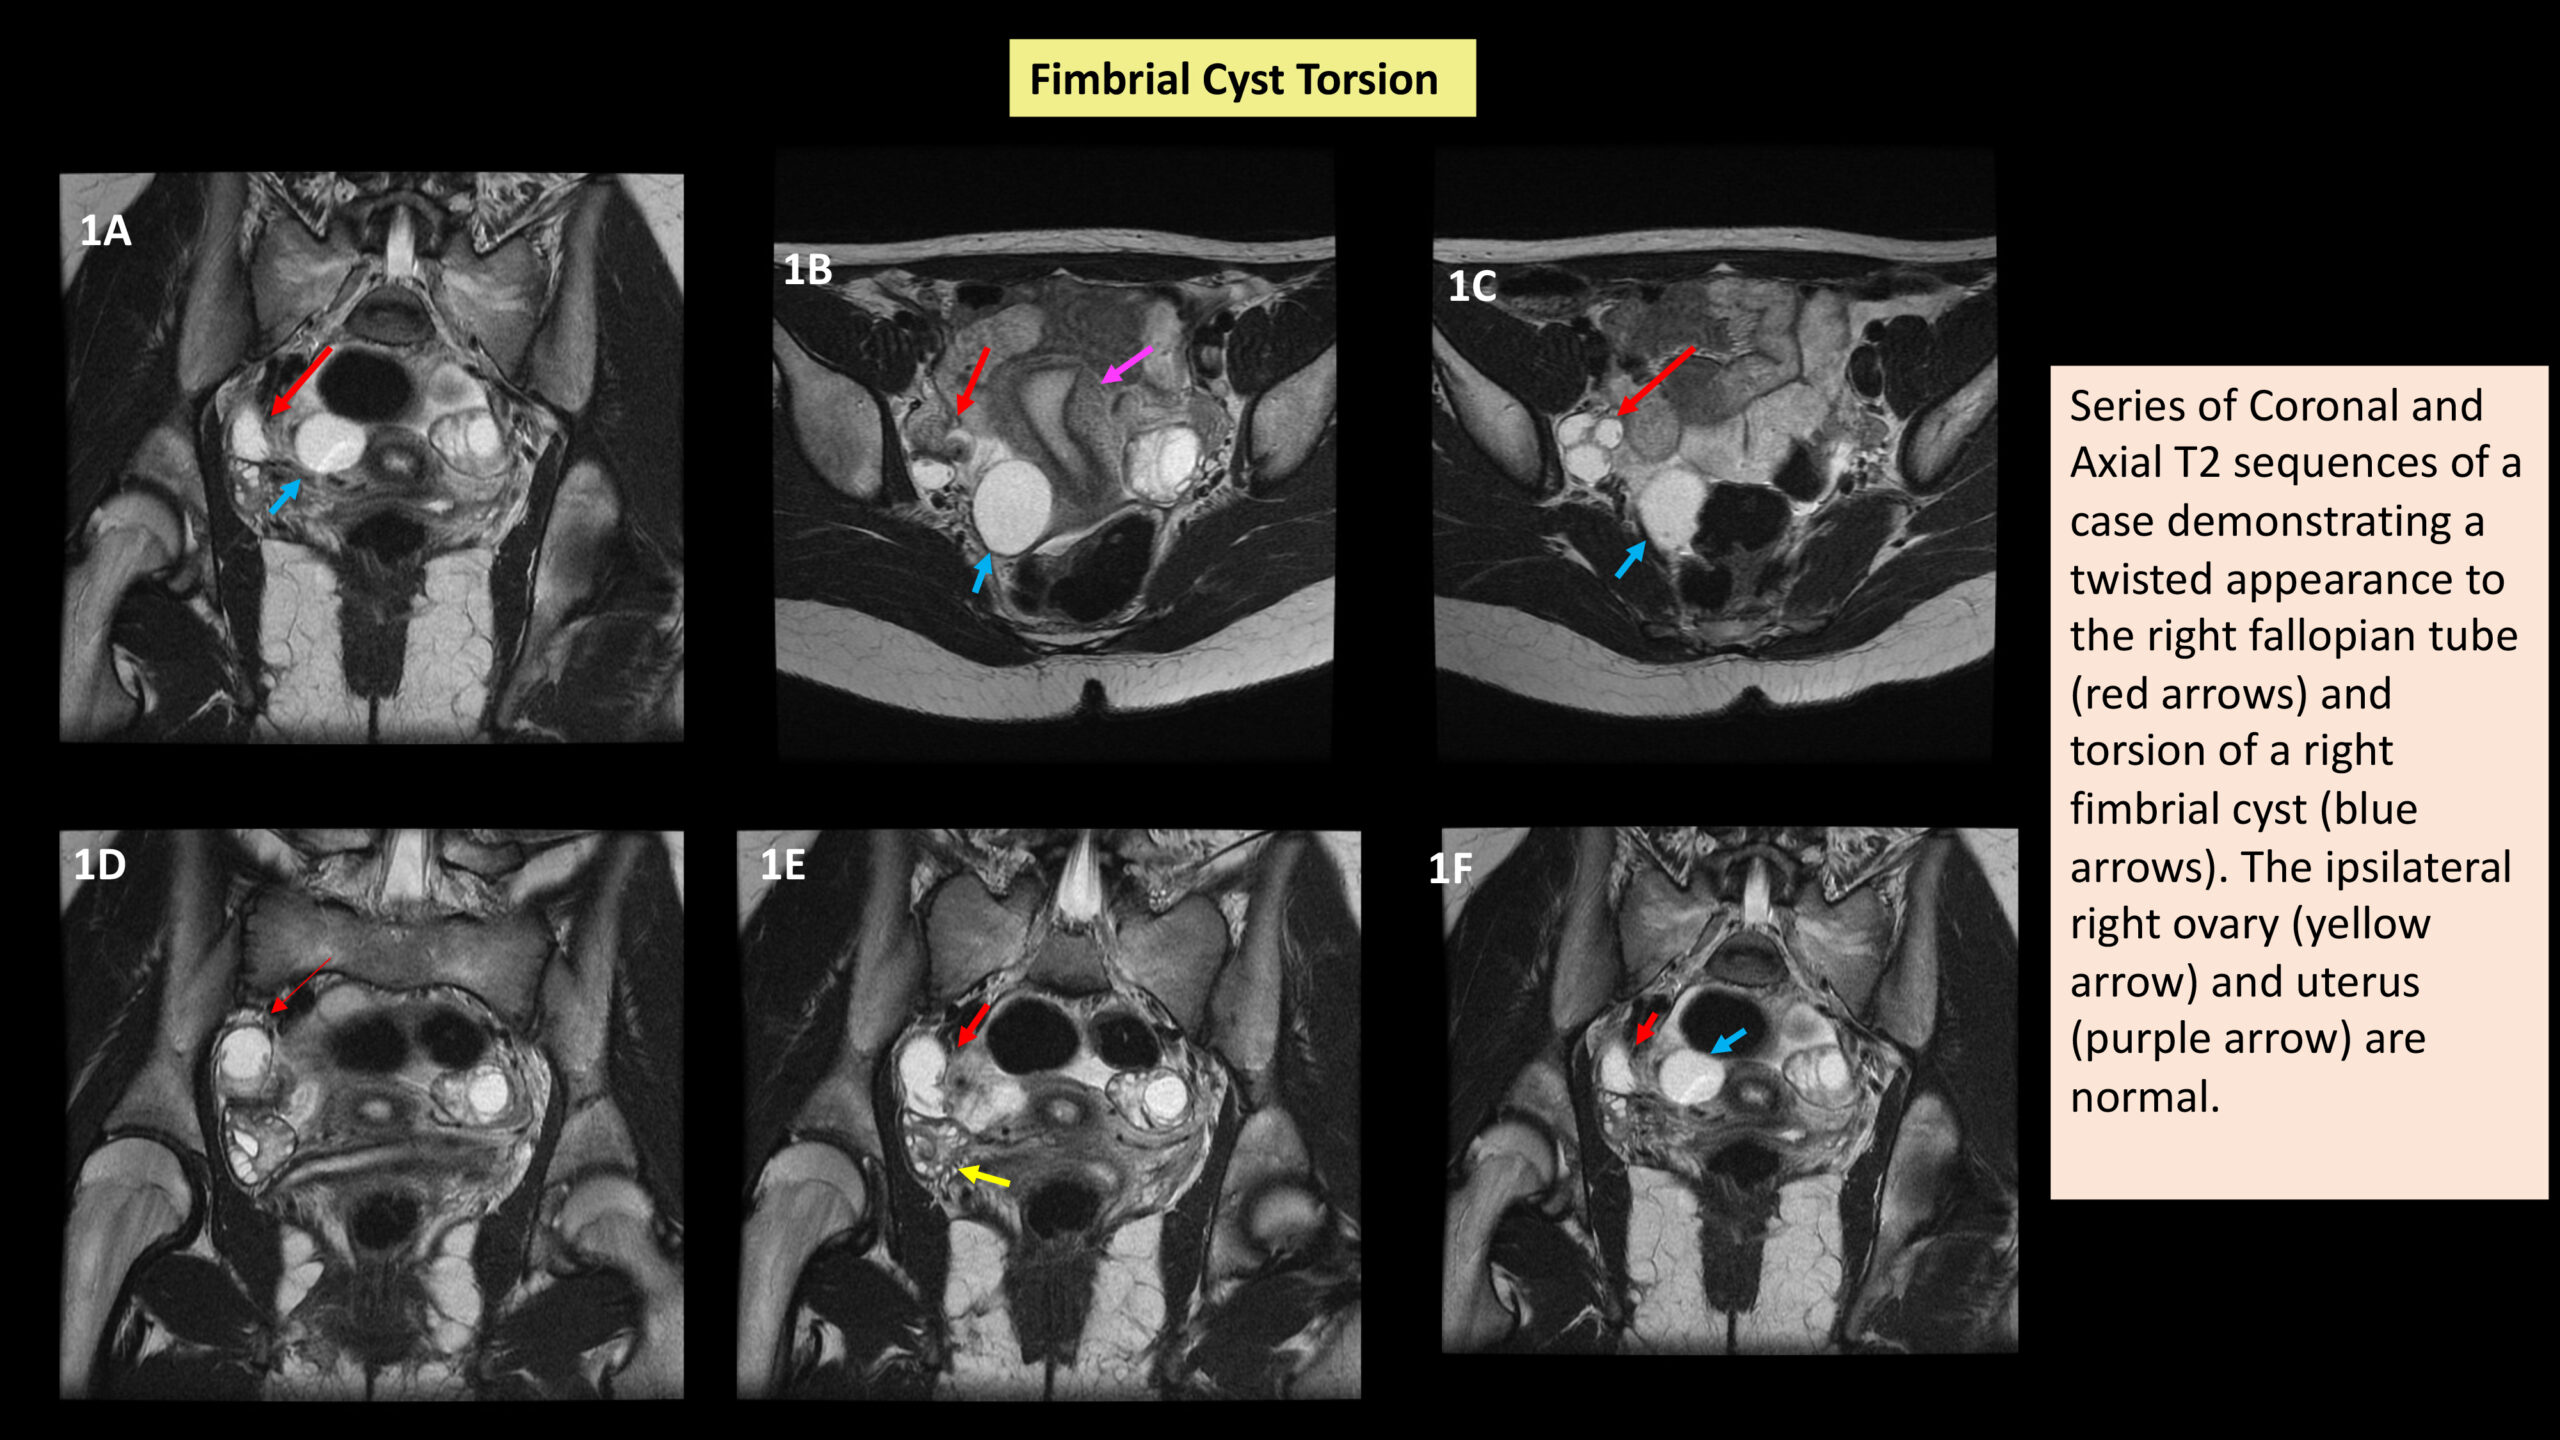 Untangling the Mystery: Radiological Insights into Female Pelvic Organ Torsion